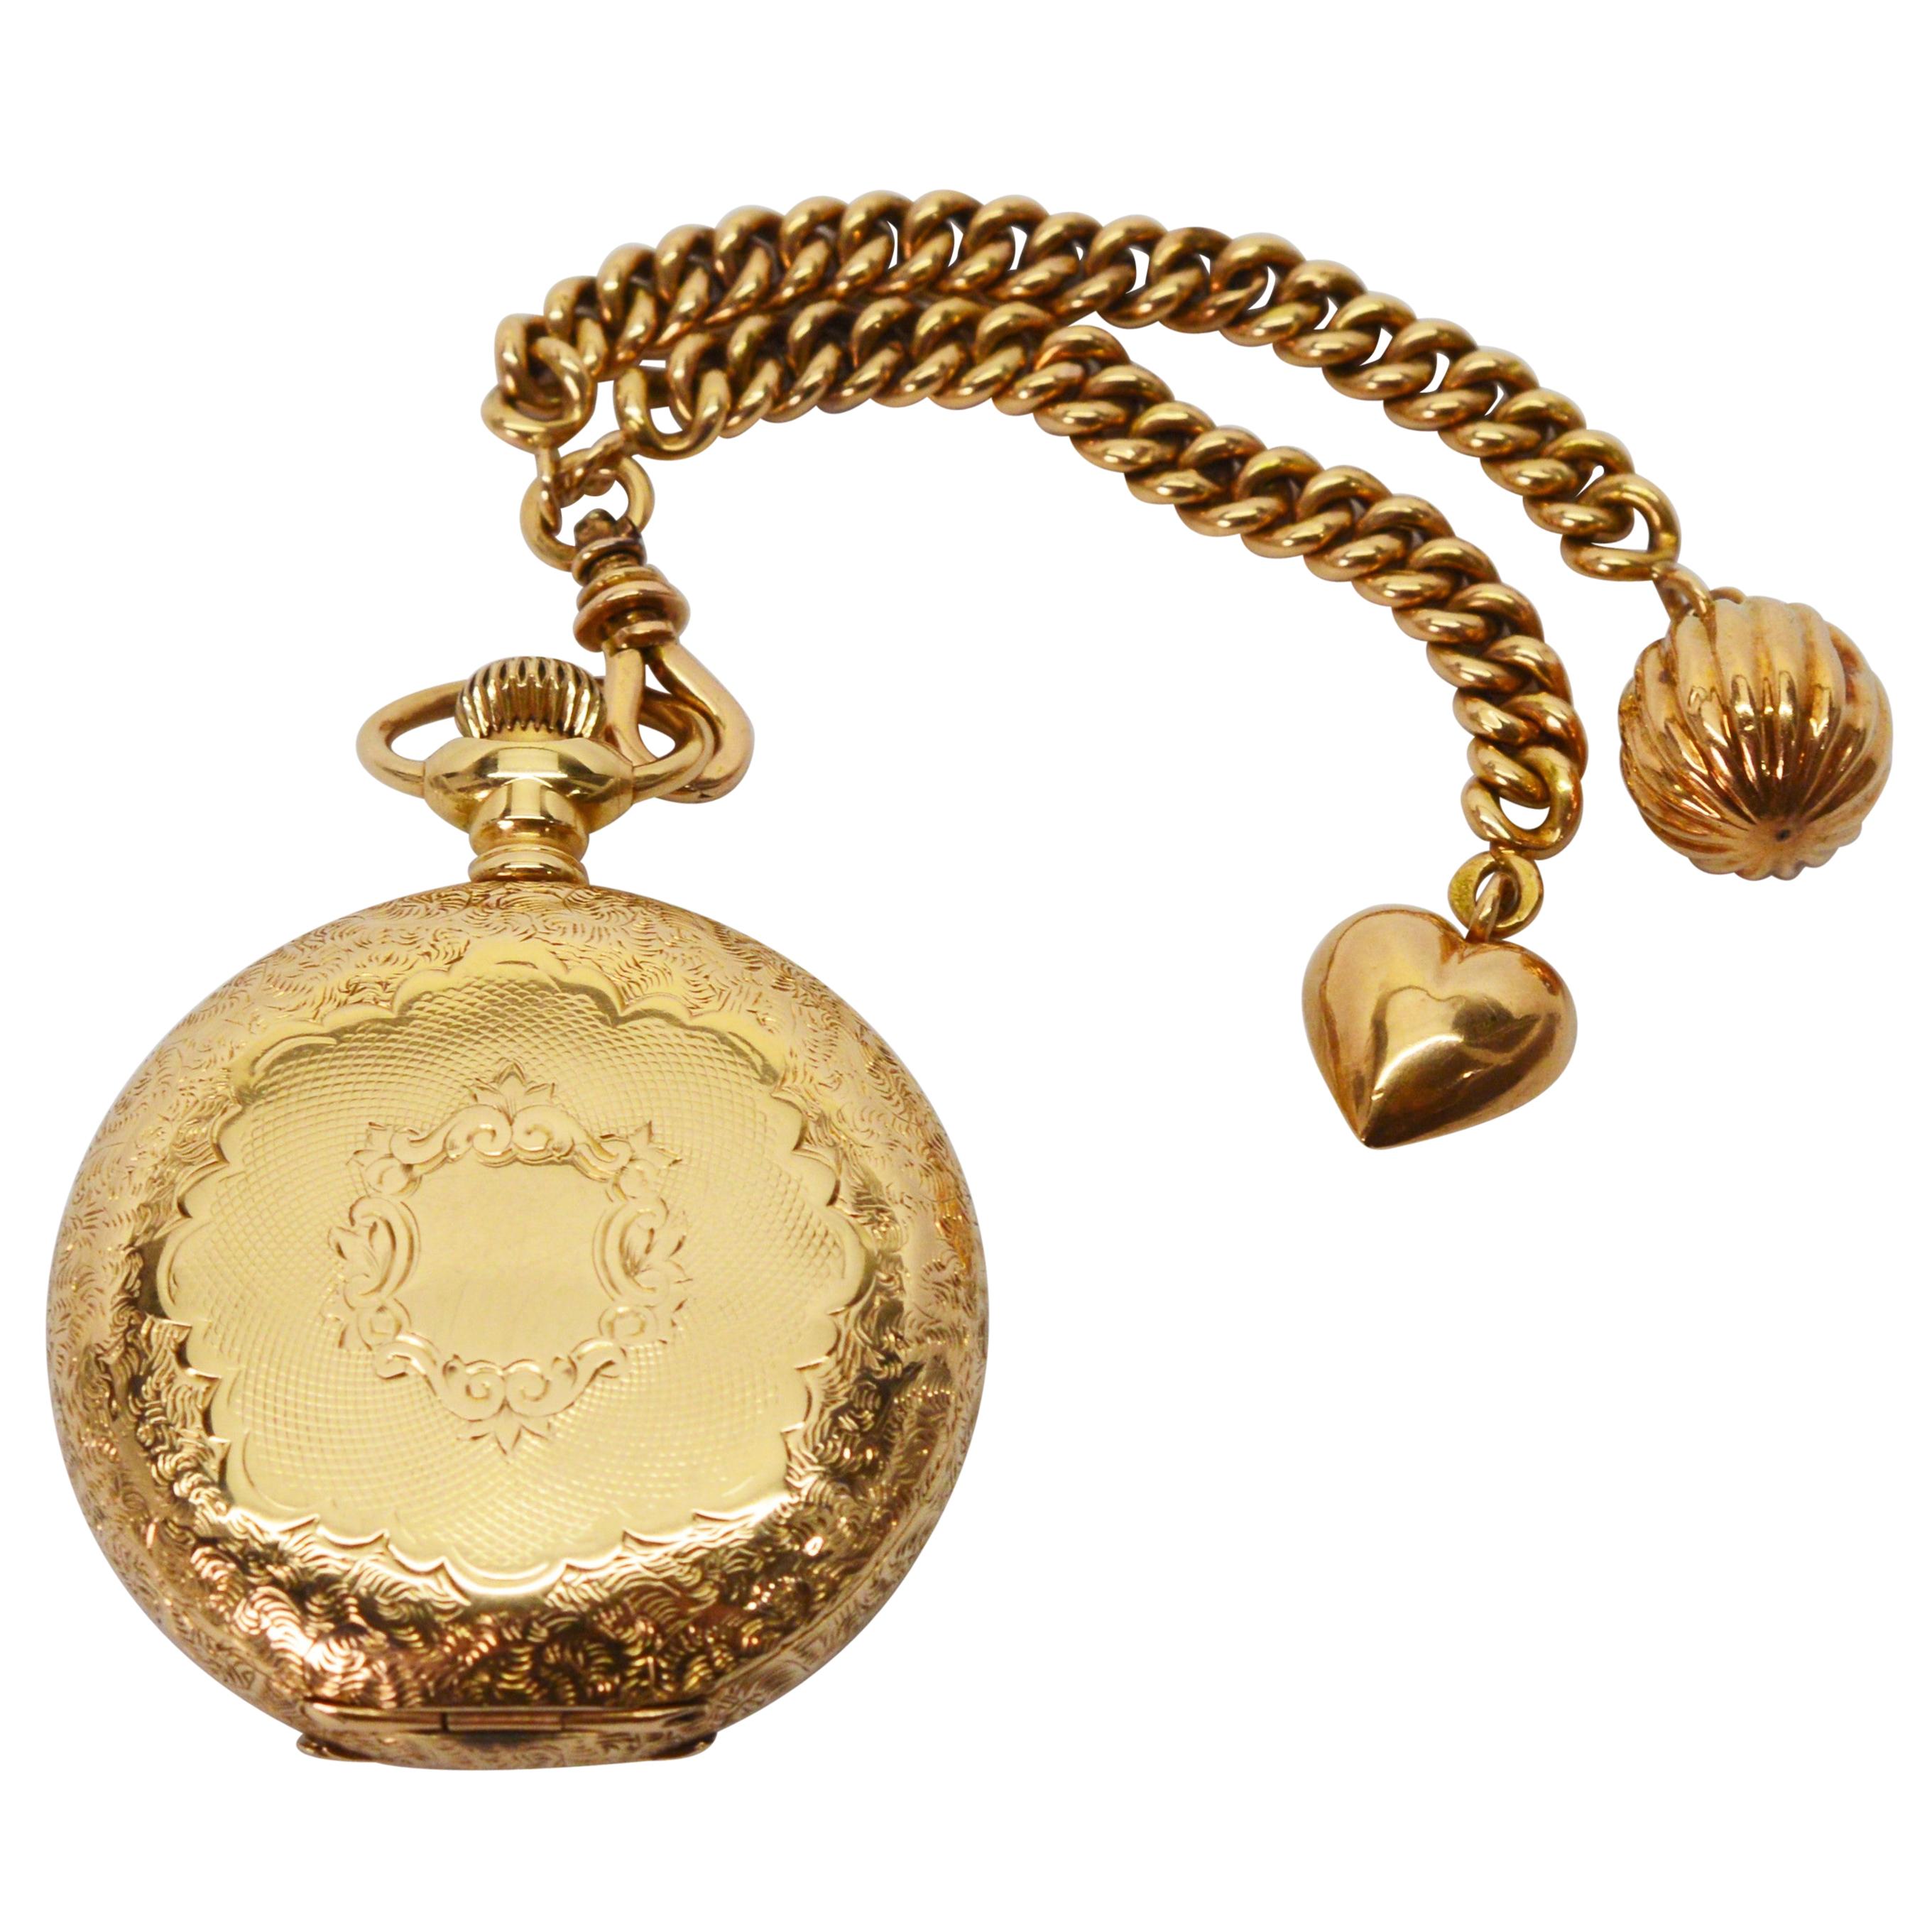 Waltham American Riverside Pocket Watch with Fob and Charms